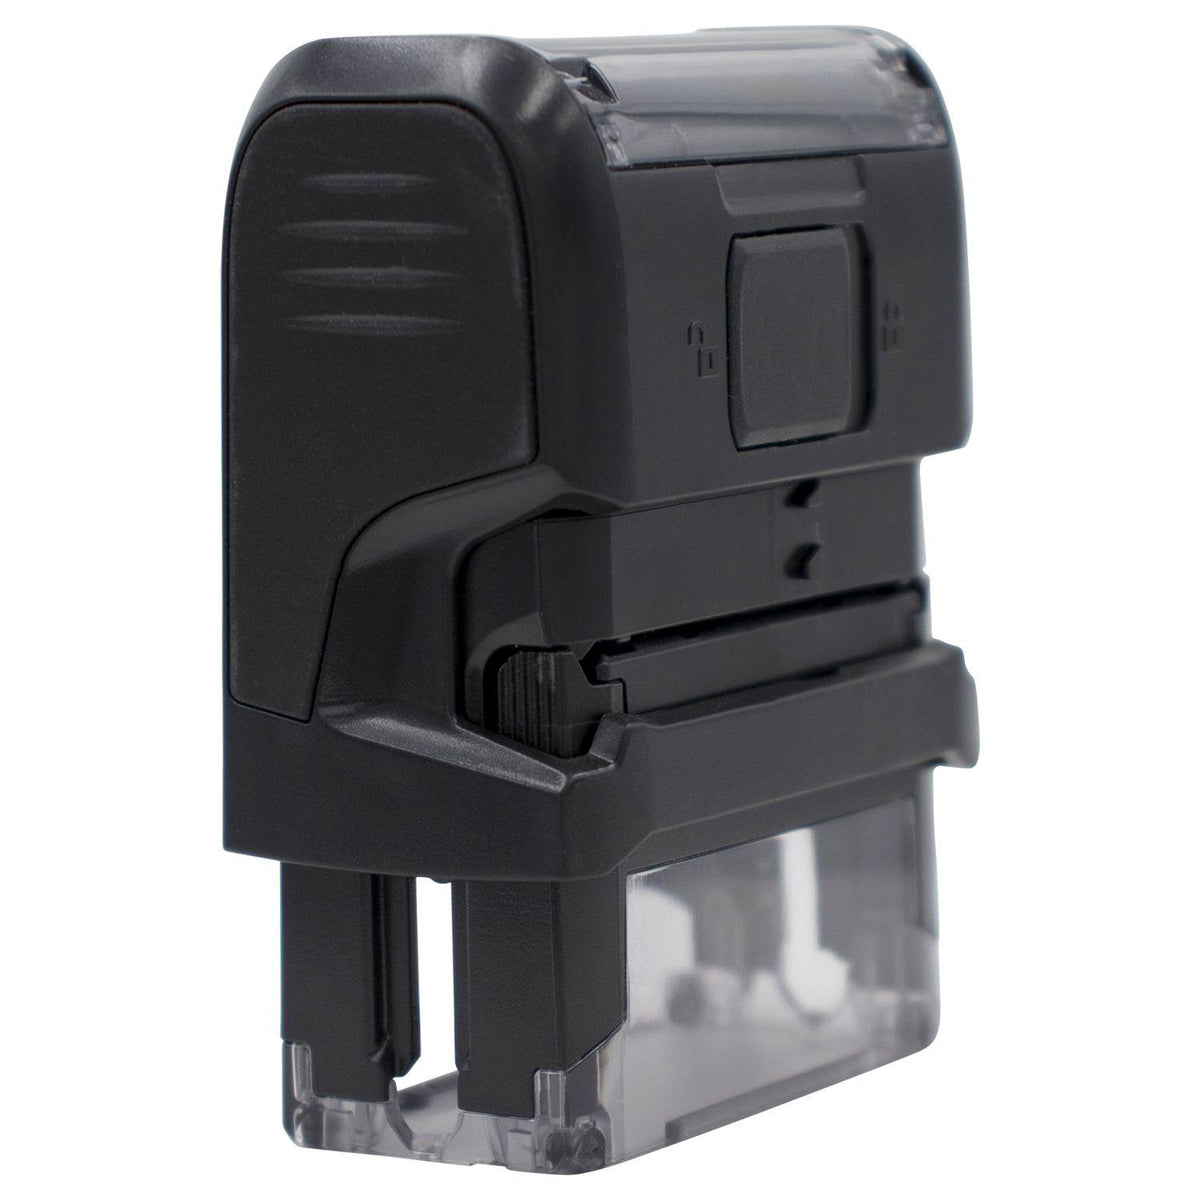 Self-Inking Bold FYI Stamp - Engineer Seal Stamps - Brand_Trodat, Impression Size_Small, Stamp Type_Self-Inking Stamp, Type of Use_General, Type of Use_Office